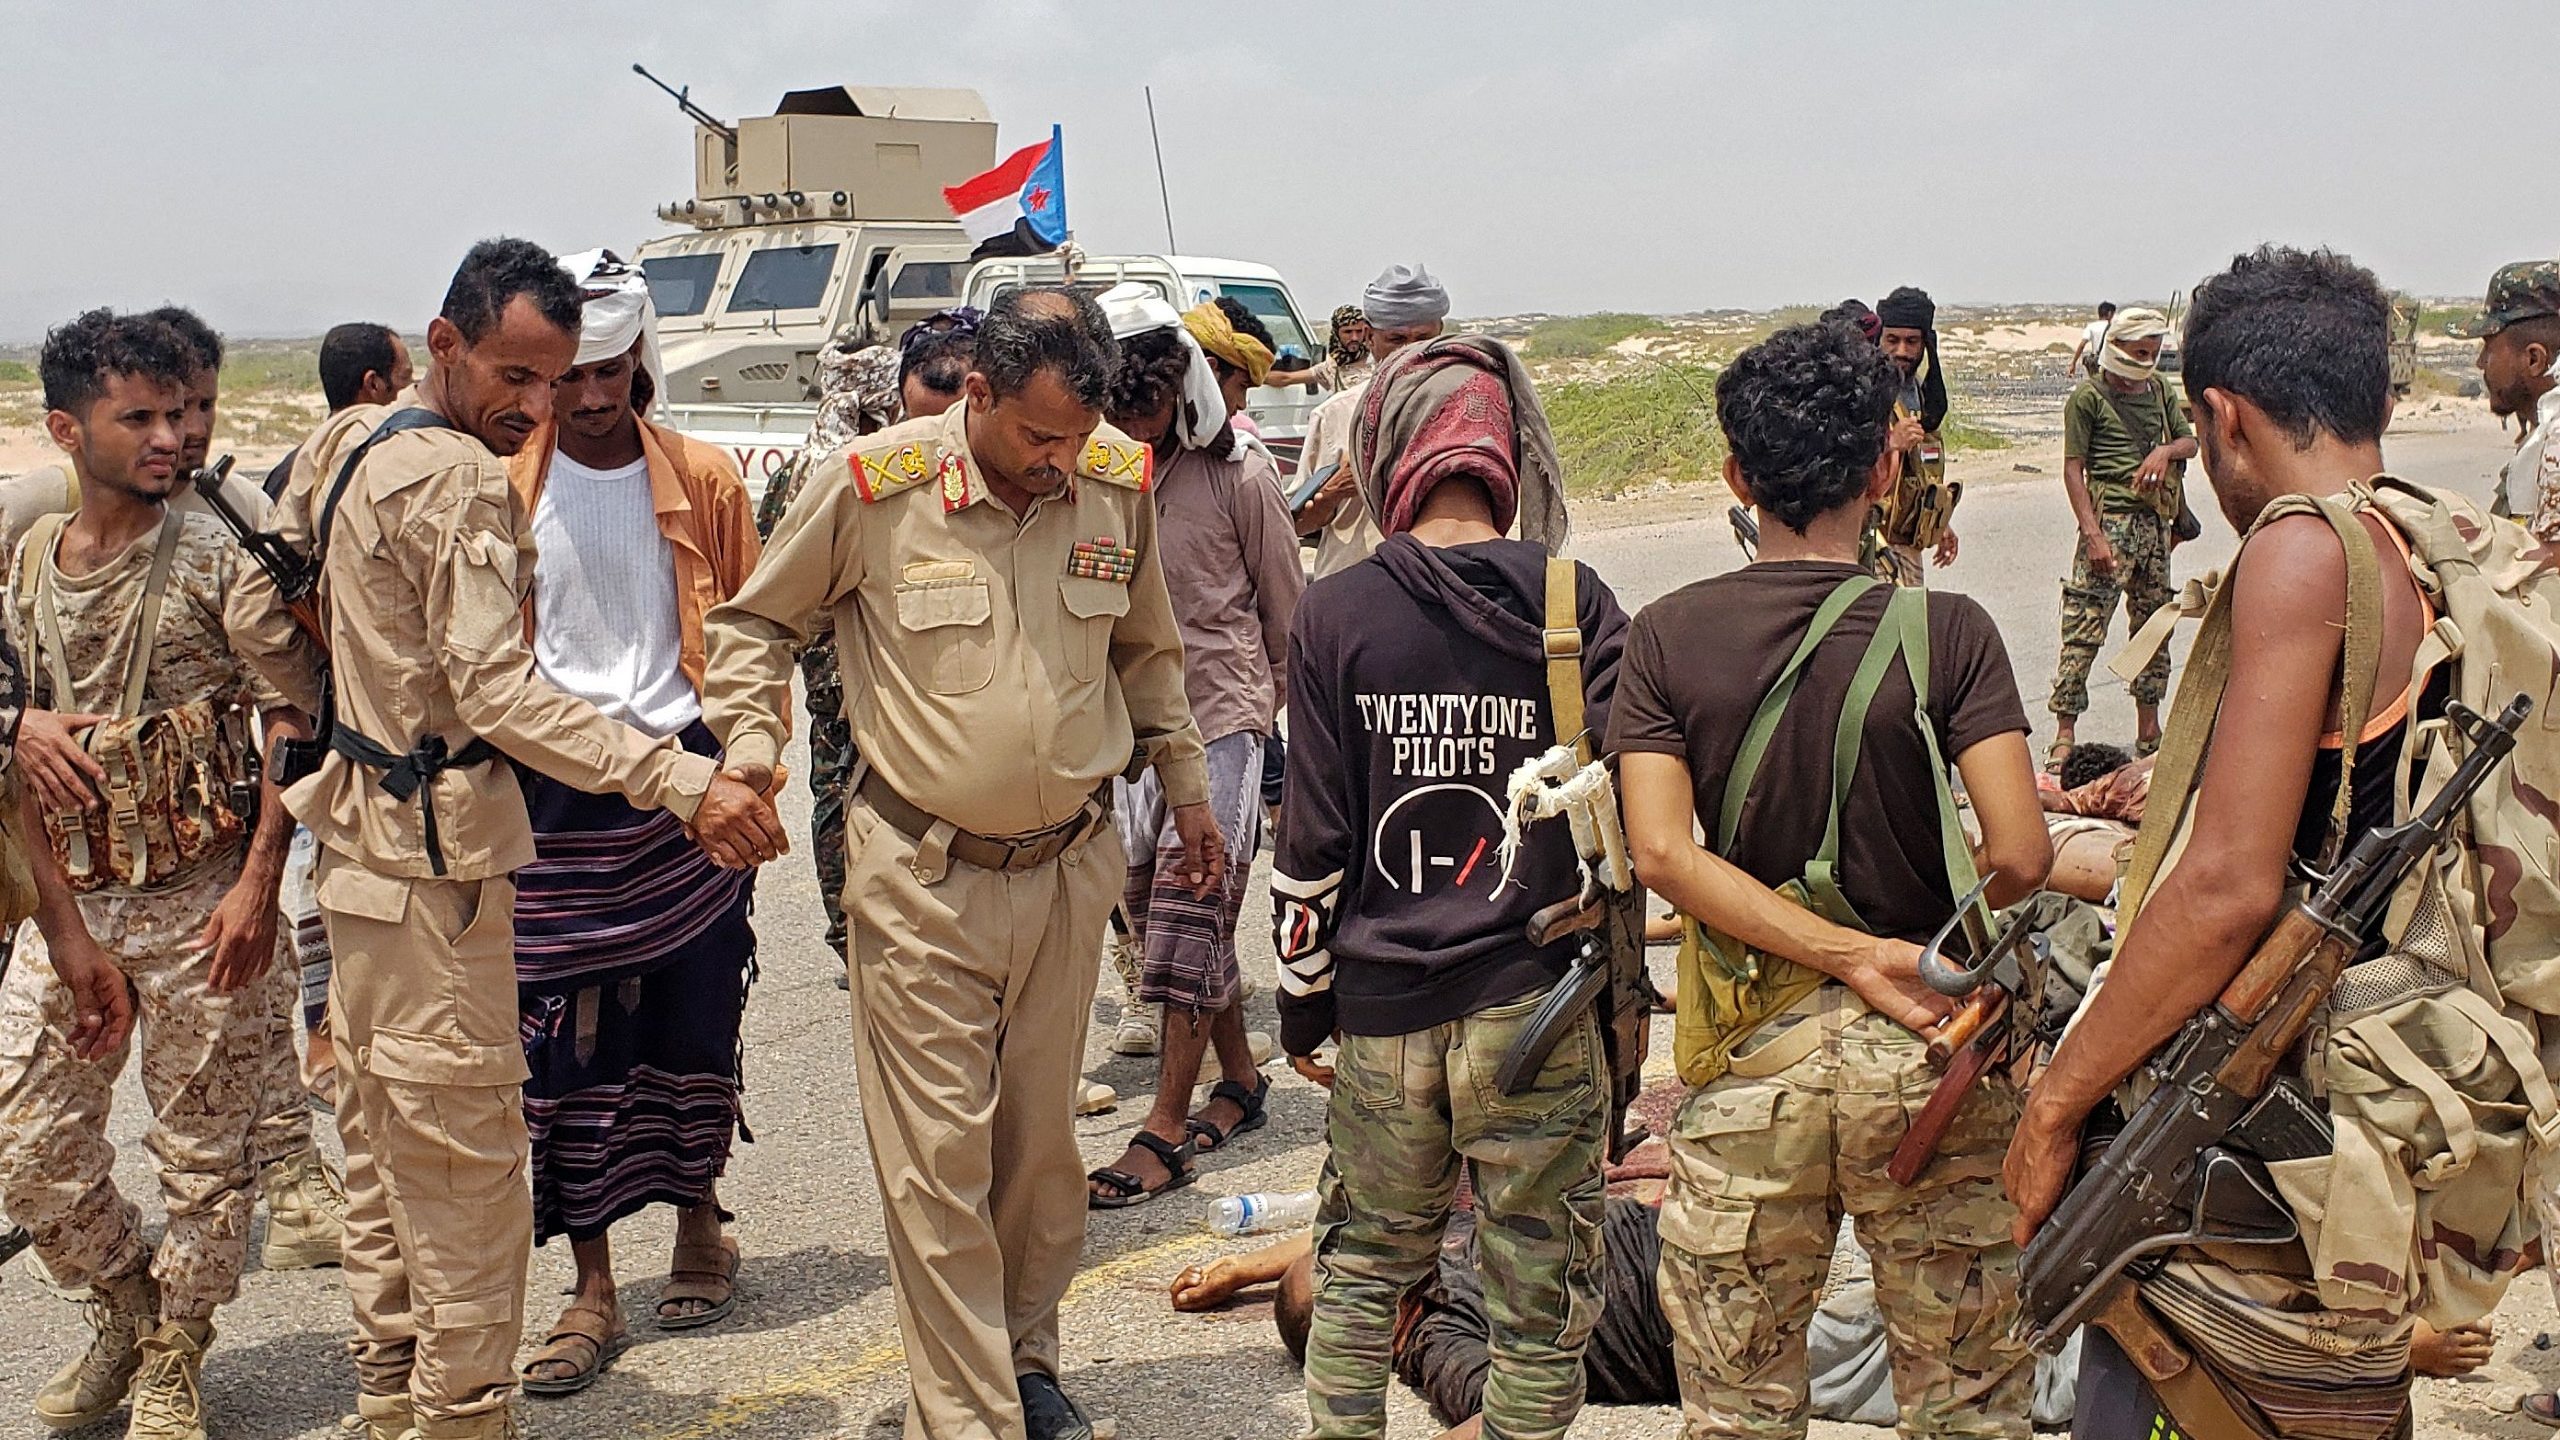 Scores of al-Qaida Fighters Removed From Southern Yemen in Pro-Gov’t Offensive: Military Source